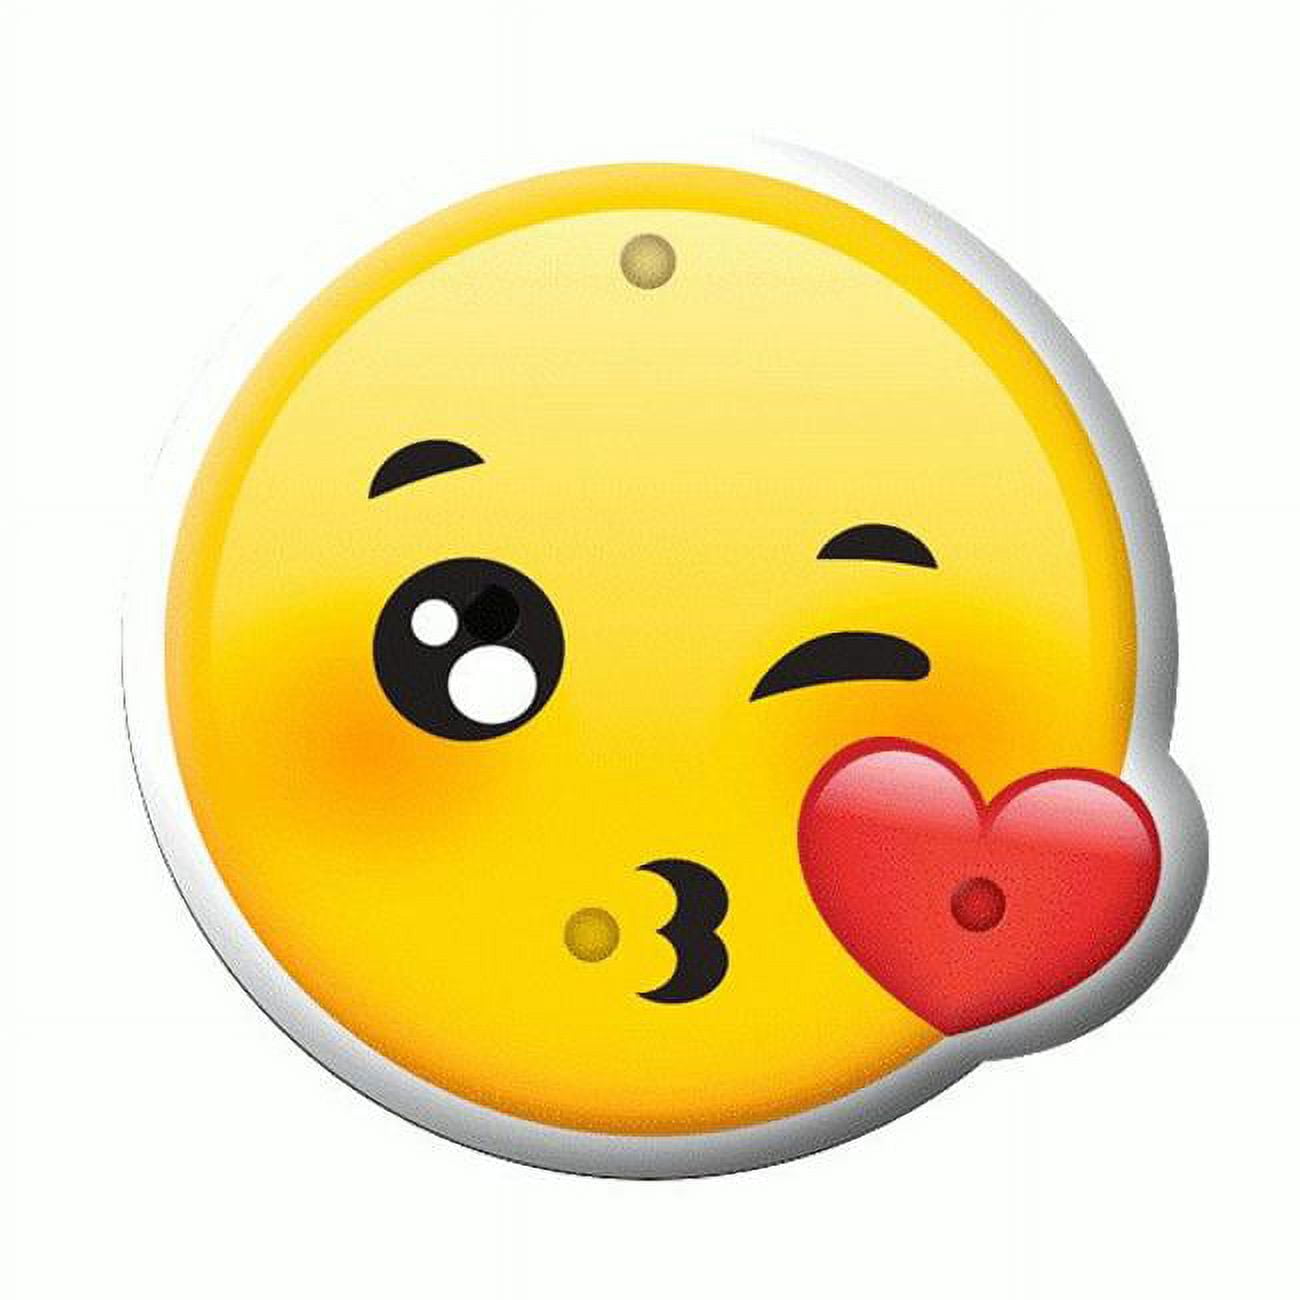 Picture of Blinkee KISSYFACEEMOJIPIN Kissy Face Emoji Light Up LED Party Pin